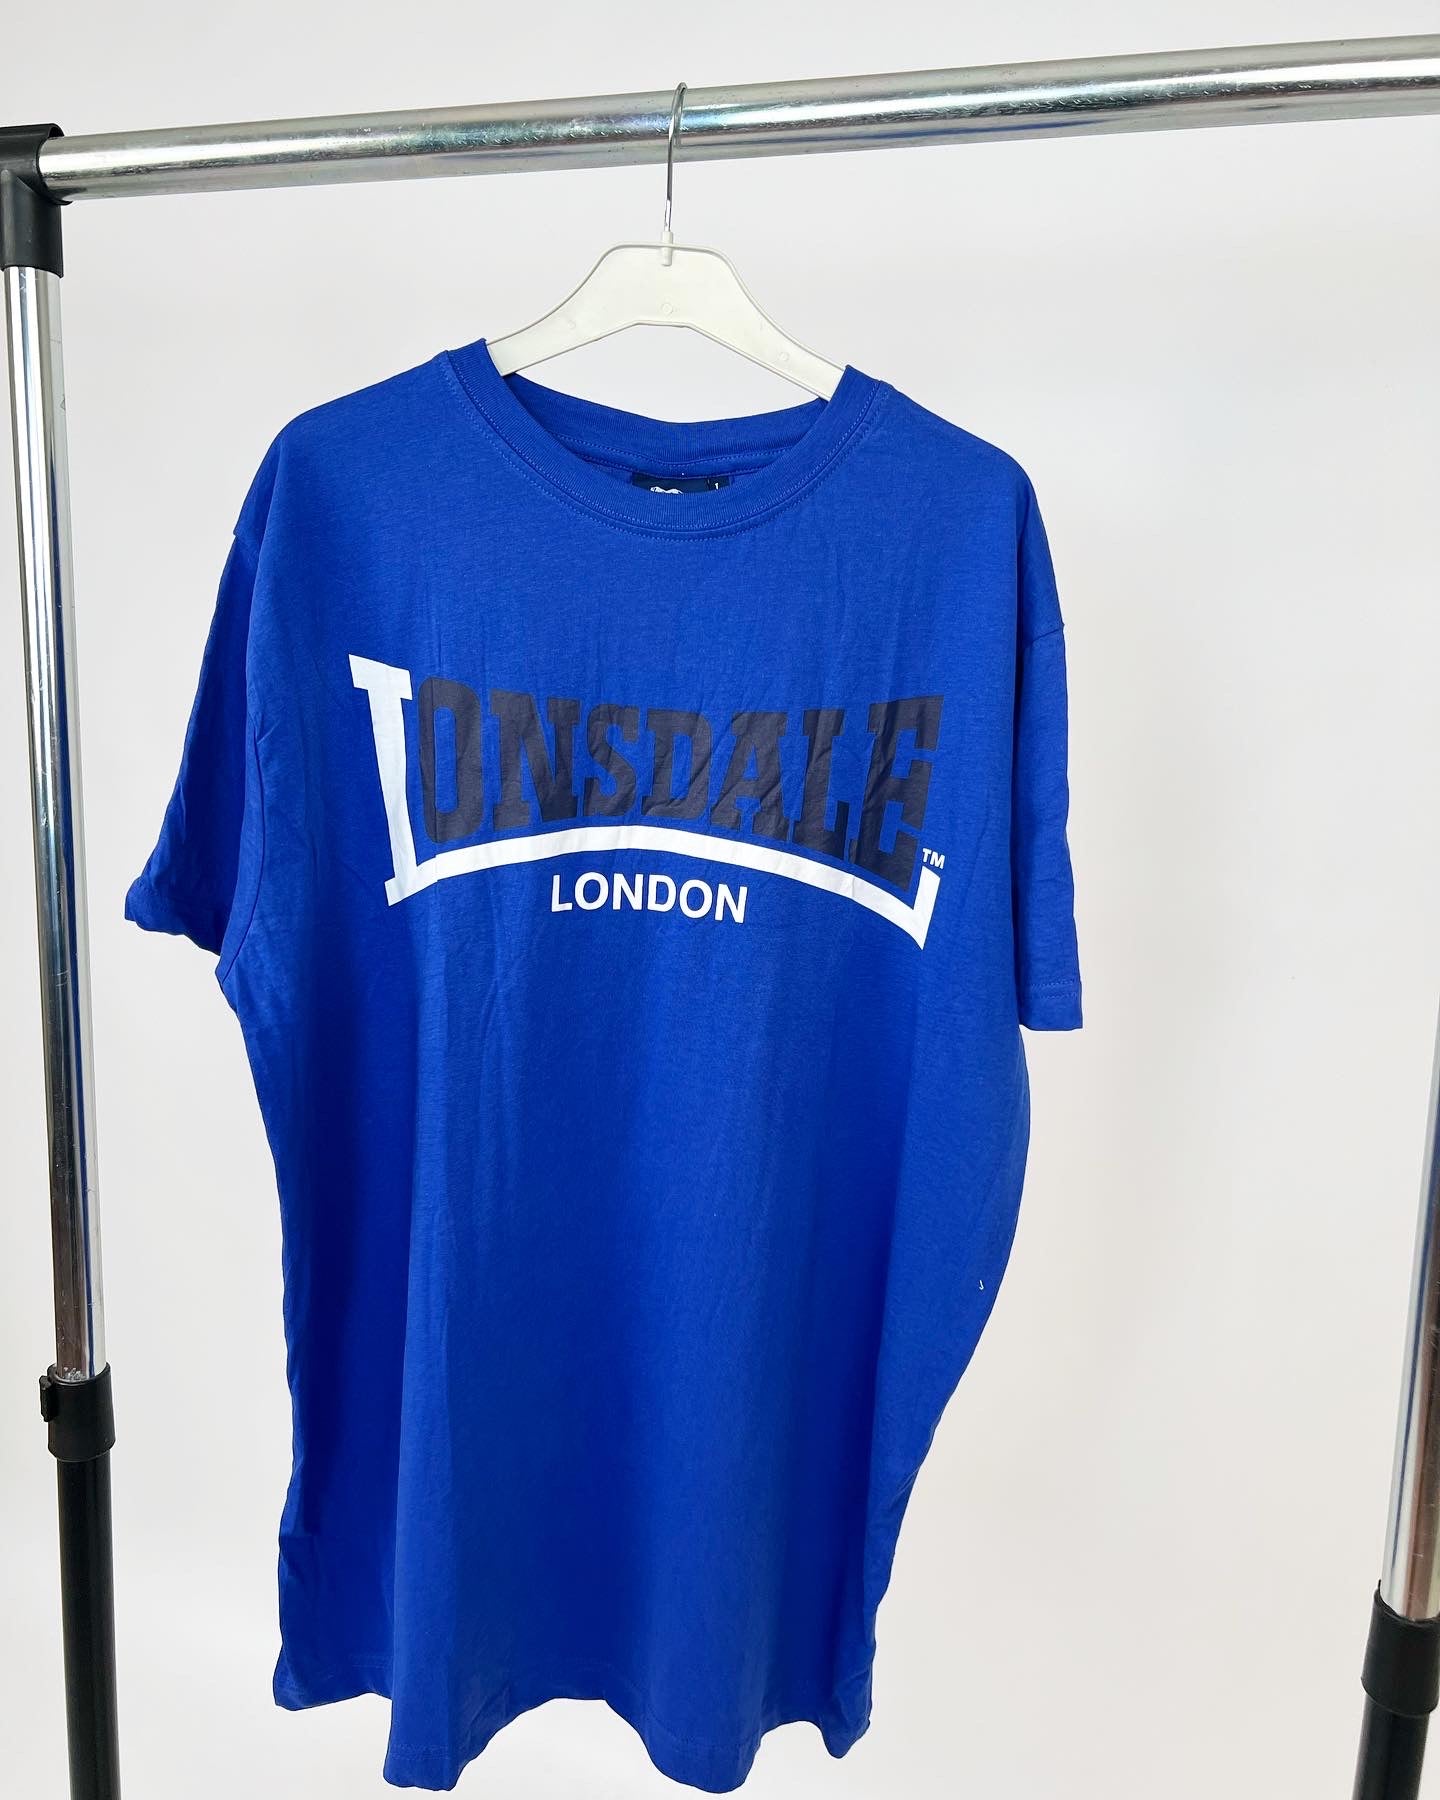 Lonsdale tee